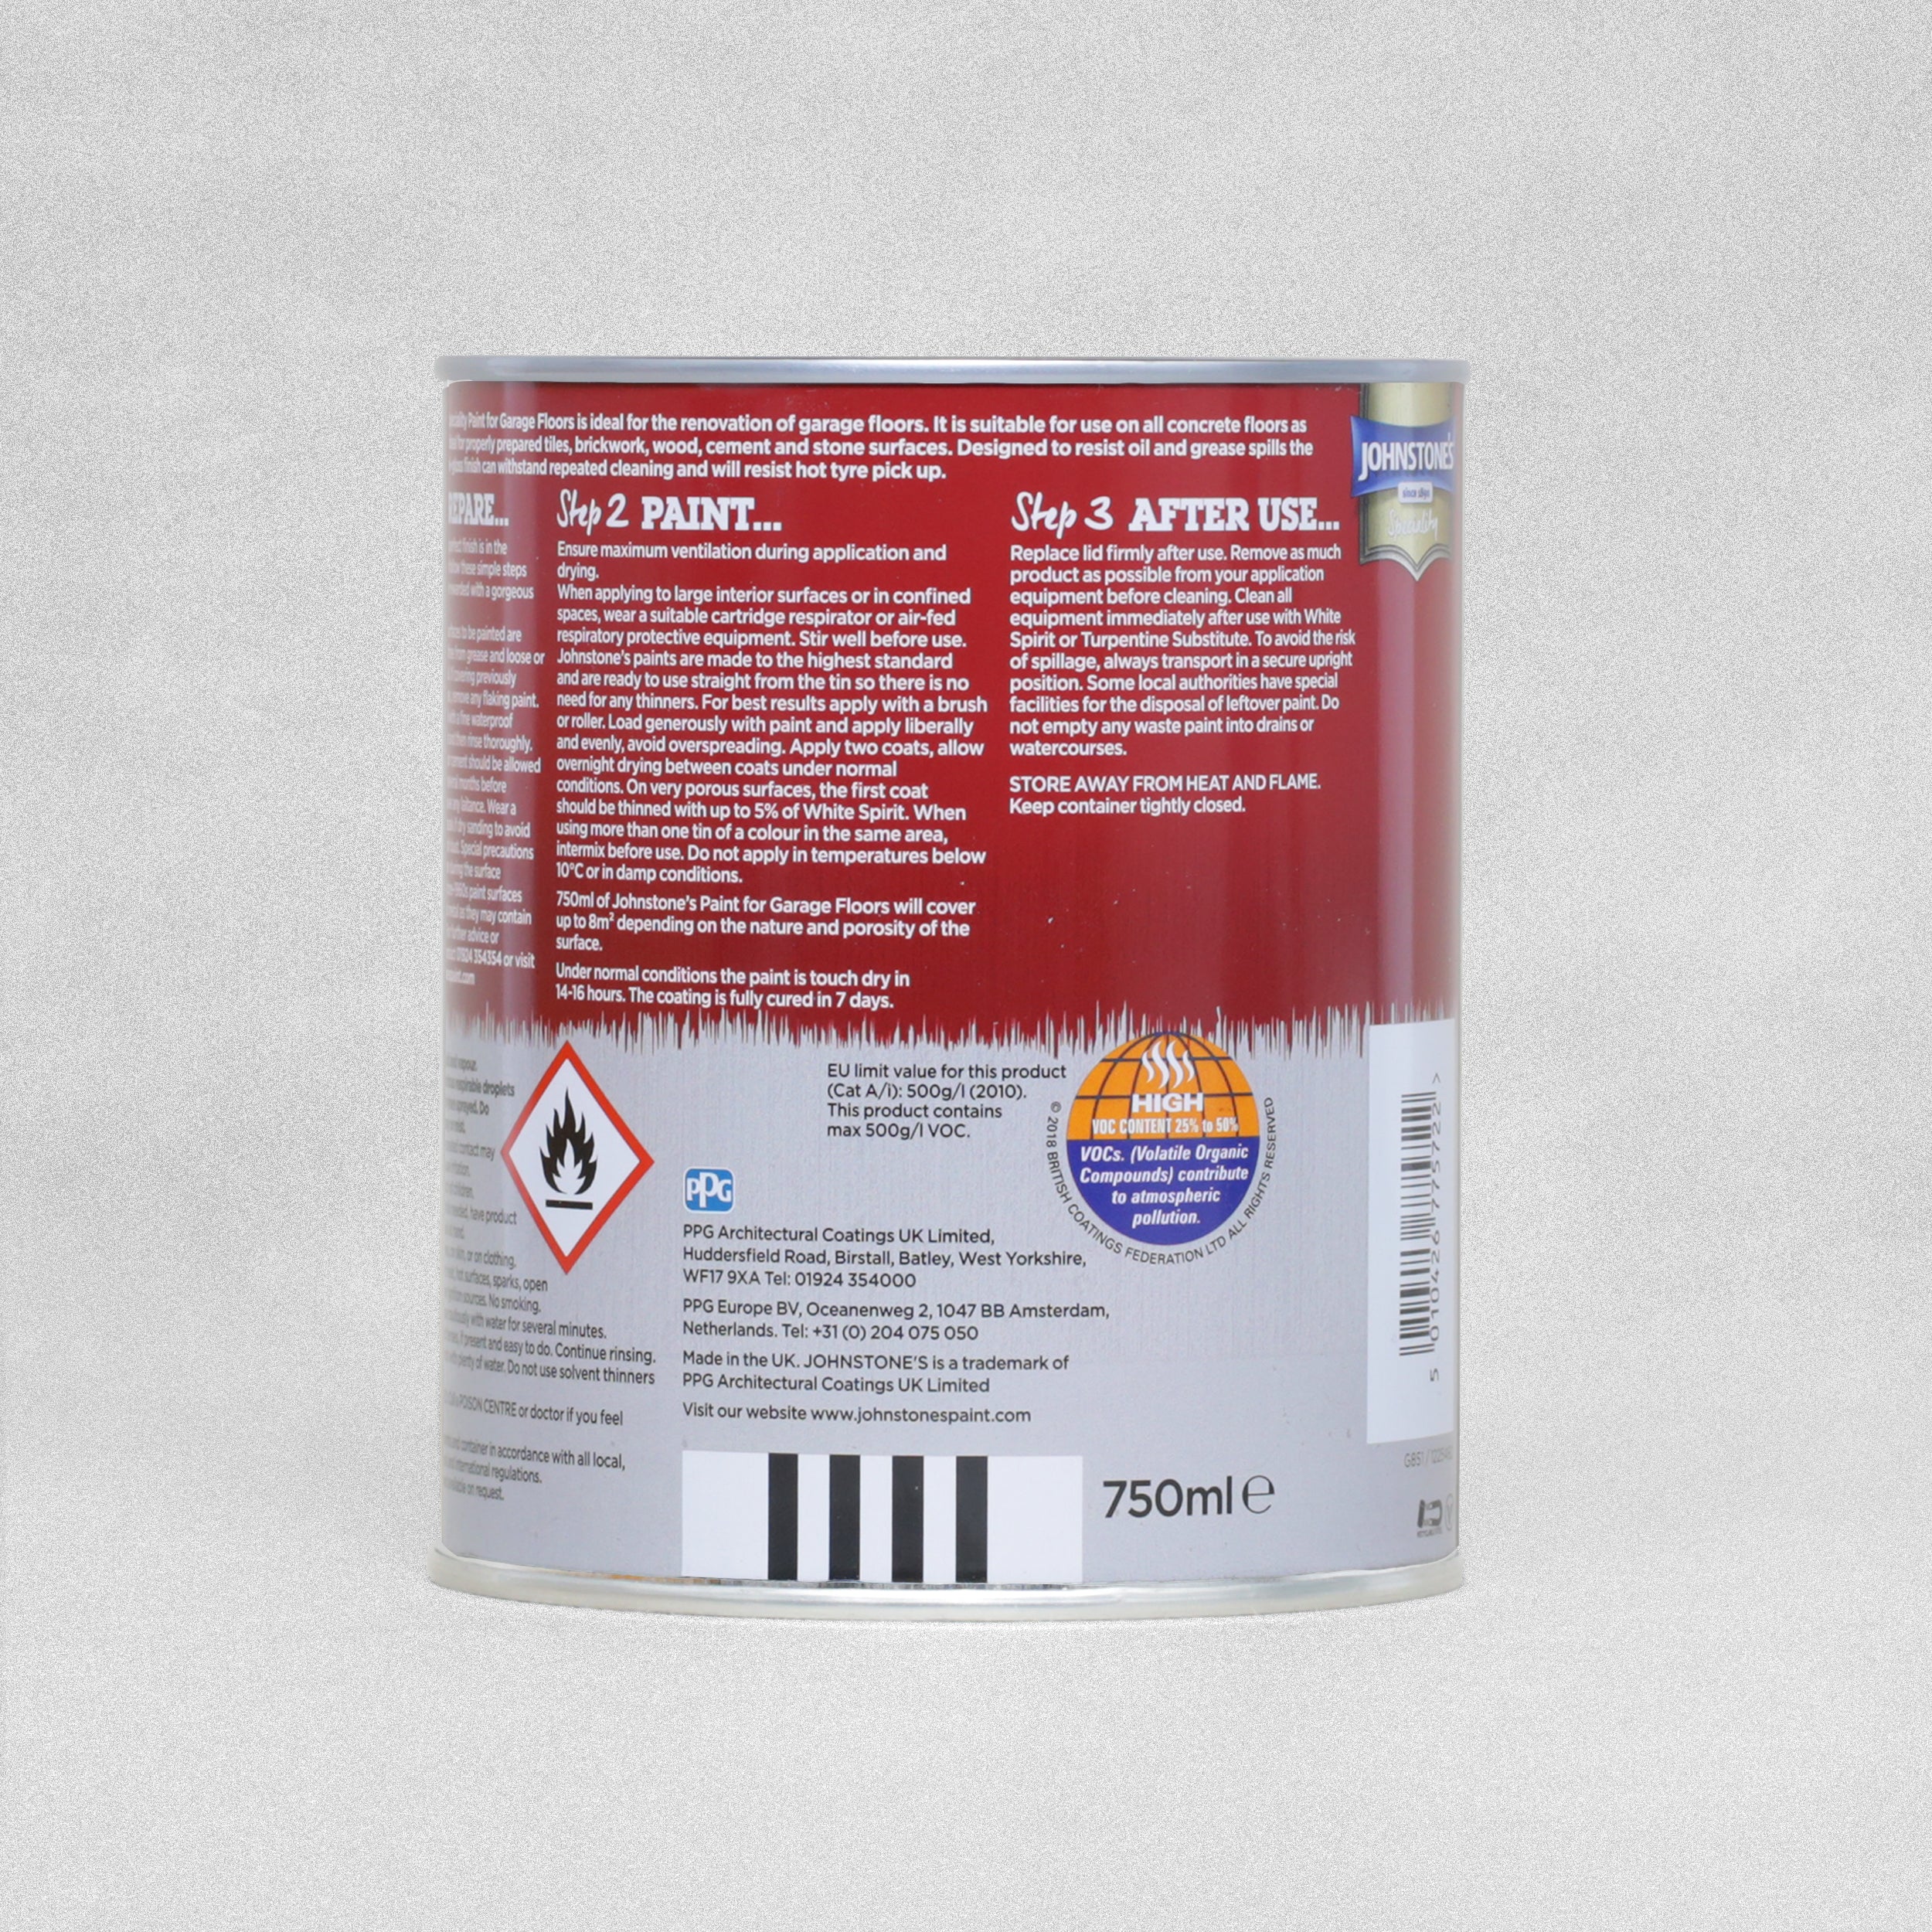 Johnstone's Speciality Paint for Garage Floors Tile Red Paint - 750ml